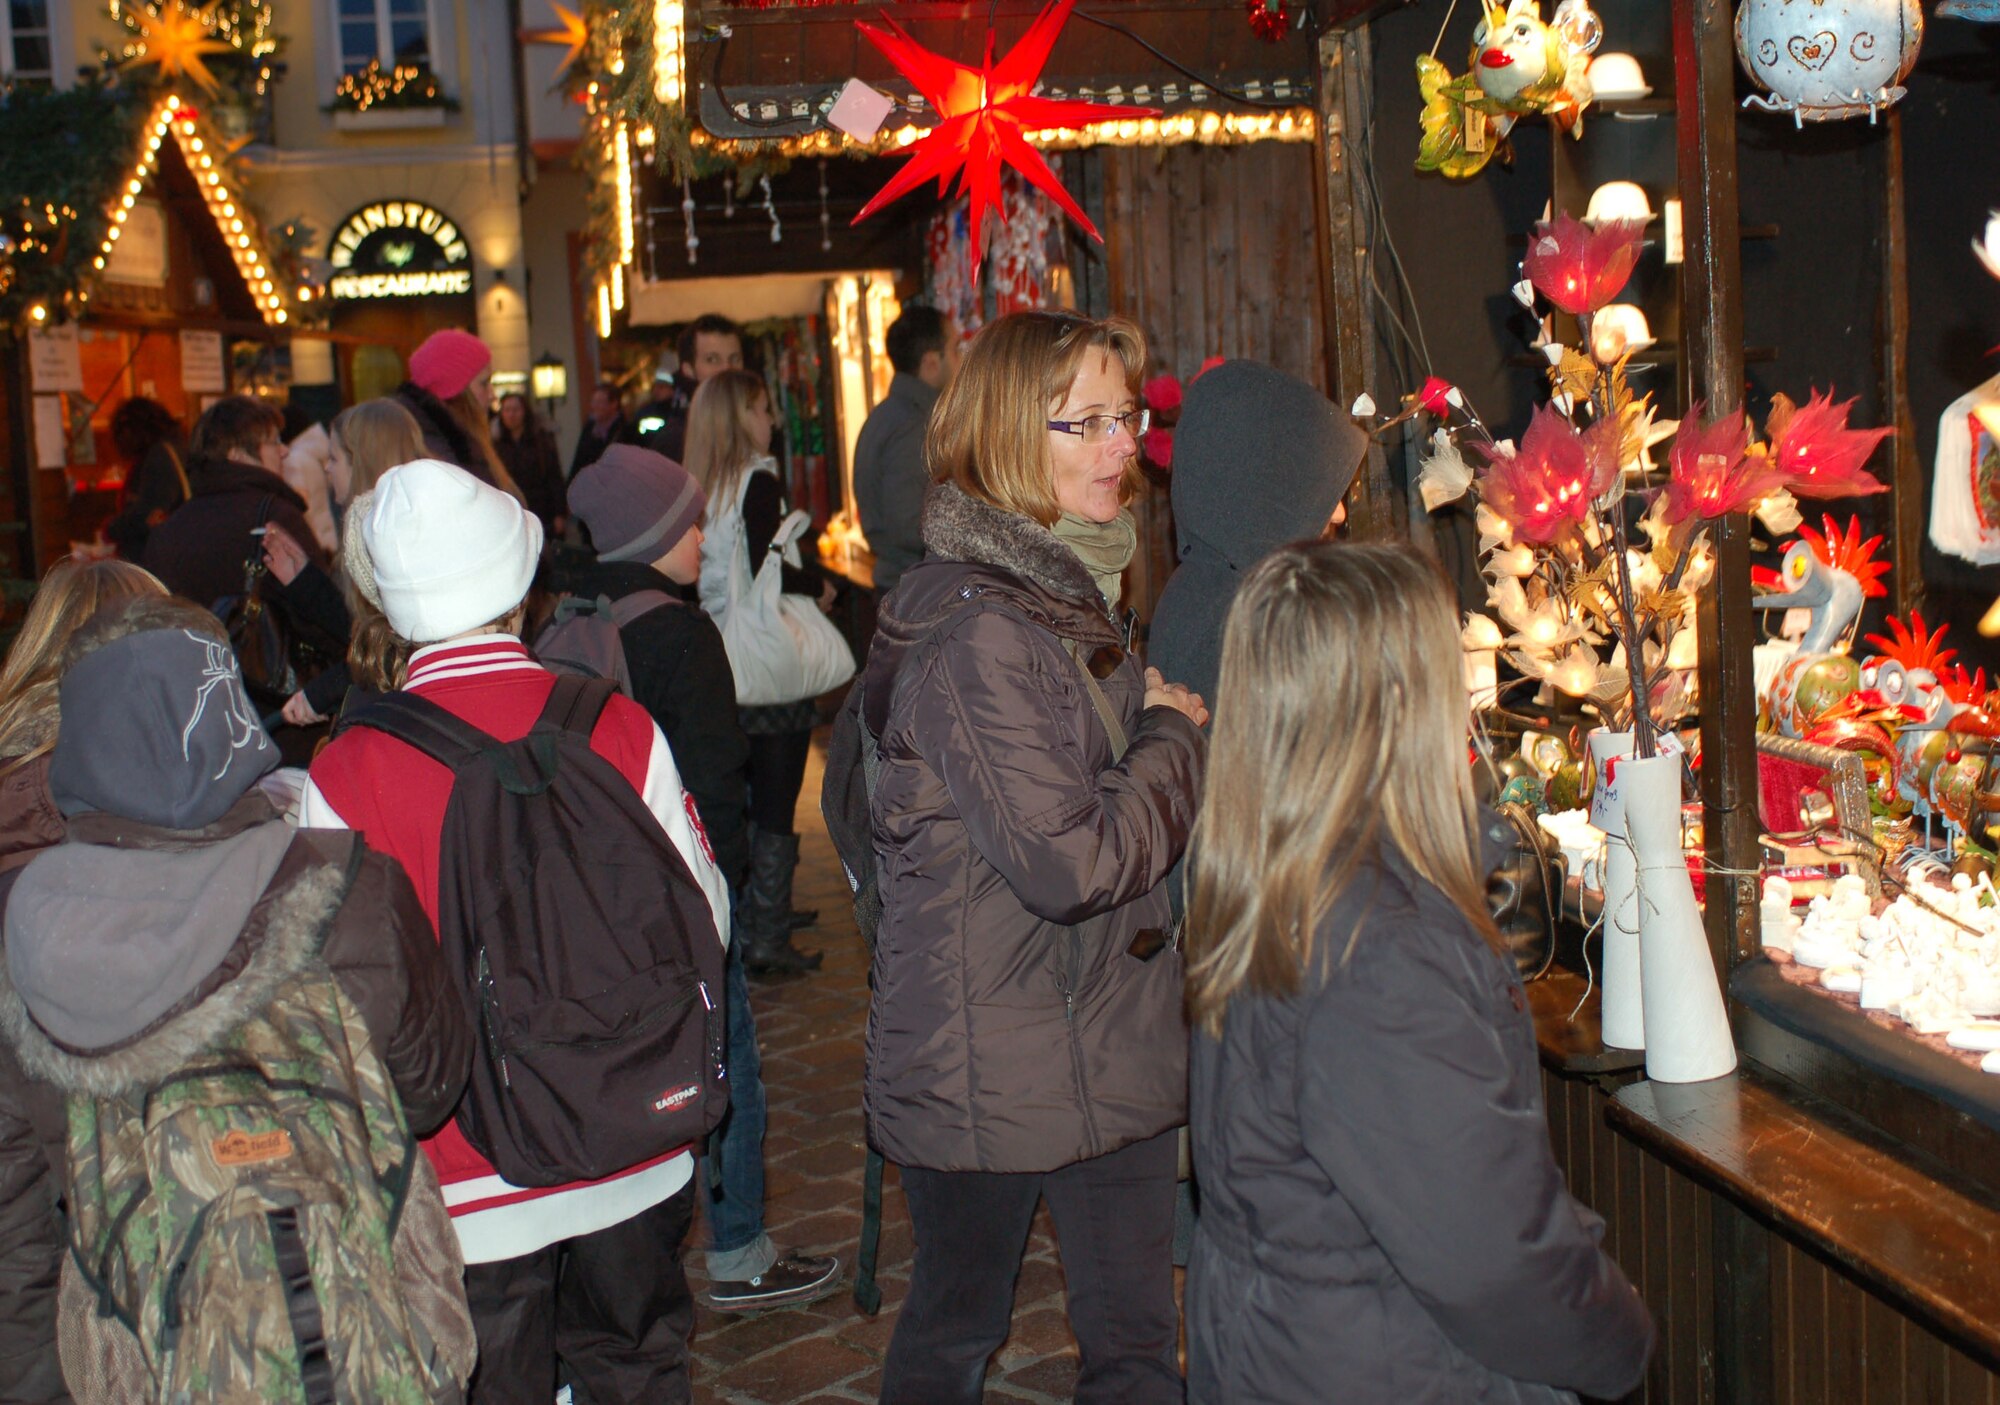 SPANGDAHLEM AIR BASE, Germany -- Visitors buy holiday gifts at Trier’s Weihnachtsmarkt Dec. 8 in the main market square in Trier. The market continues now through Dec. 22. Opening times are 10:30 a.m. - 8:30 p.m. Monday through Wednesday, 10:30 a.m. - 9:30 p.m. Thursday through Saturday, and 11 a.m. - 8:30 p.m. Sunday. Highlights include a performance by the U.S. Air Forces in Europe Brass Band from 6 - 7 p.m. Dec. 13. Music and entertainment is scheduled throughout each weekend, and Sankt Nikolaus will visit often. (U.S. Air Force photo/Iris Reiff)